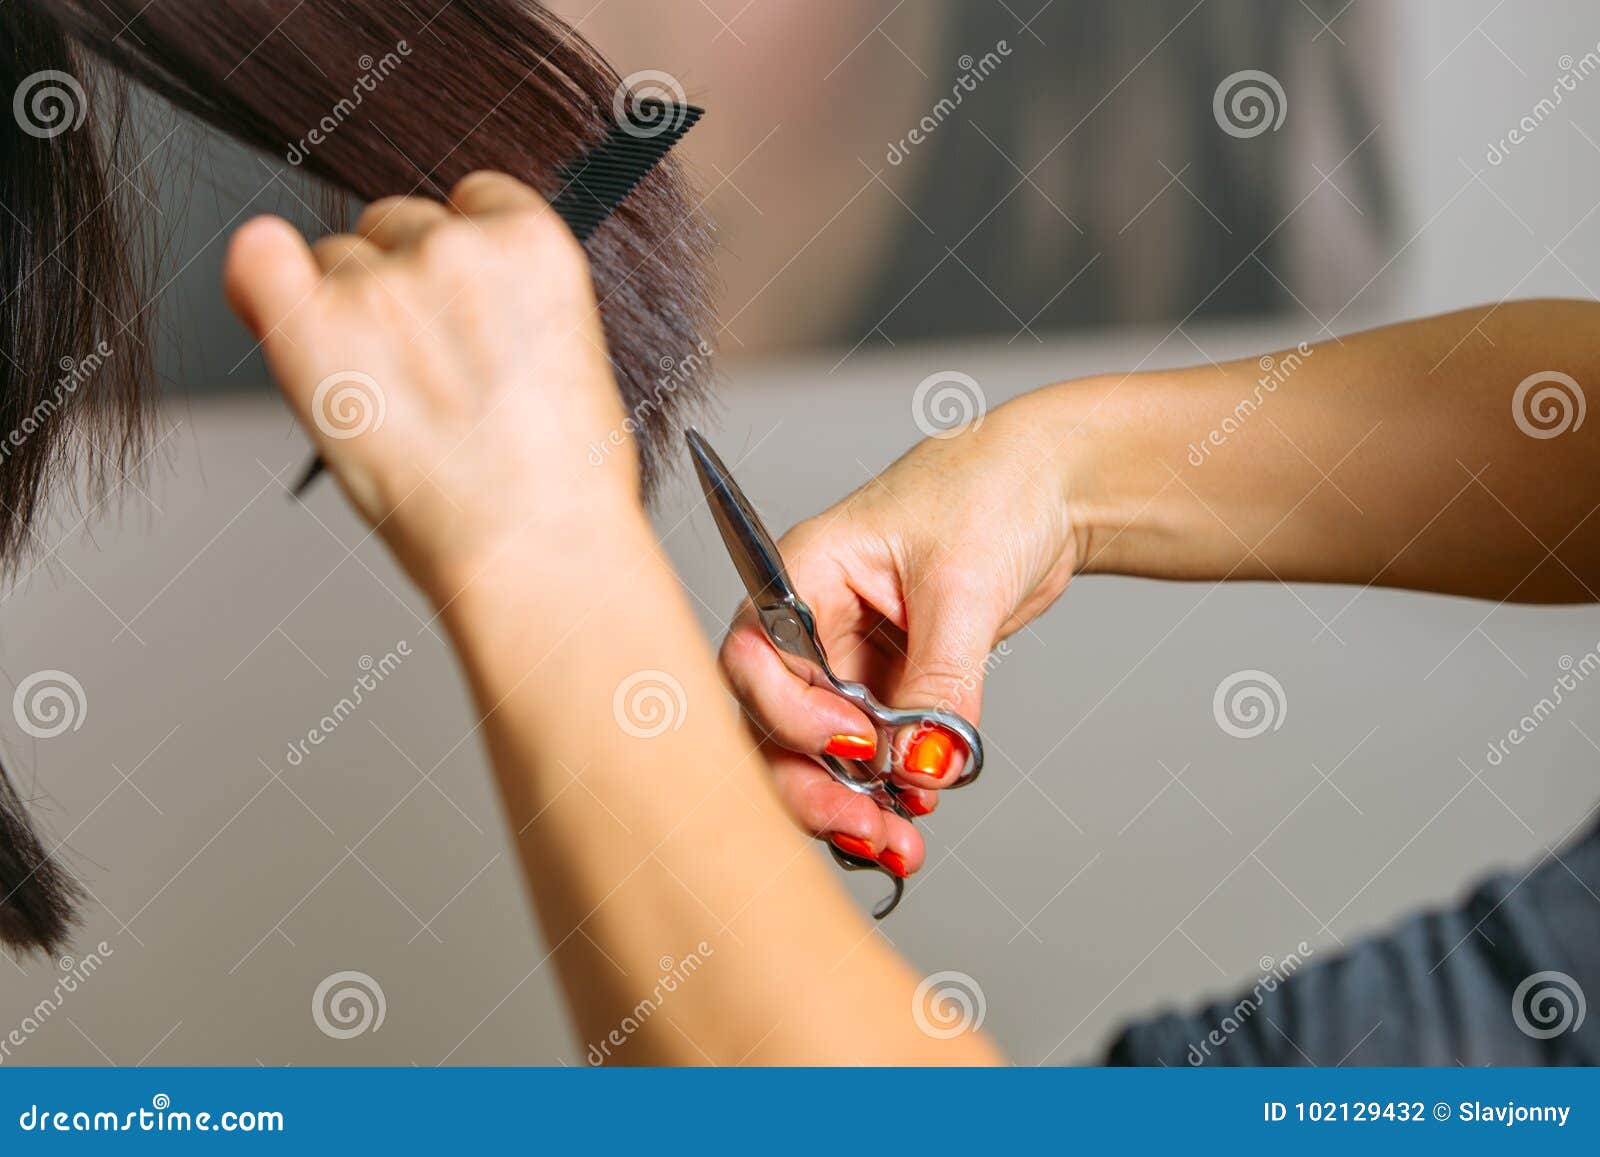 Close Up Of Hairdressers Hands Shearing Long Black Hair With